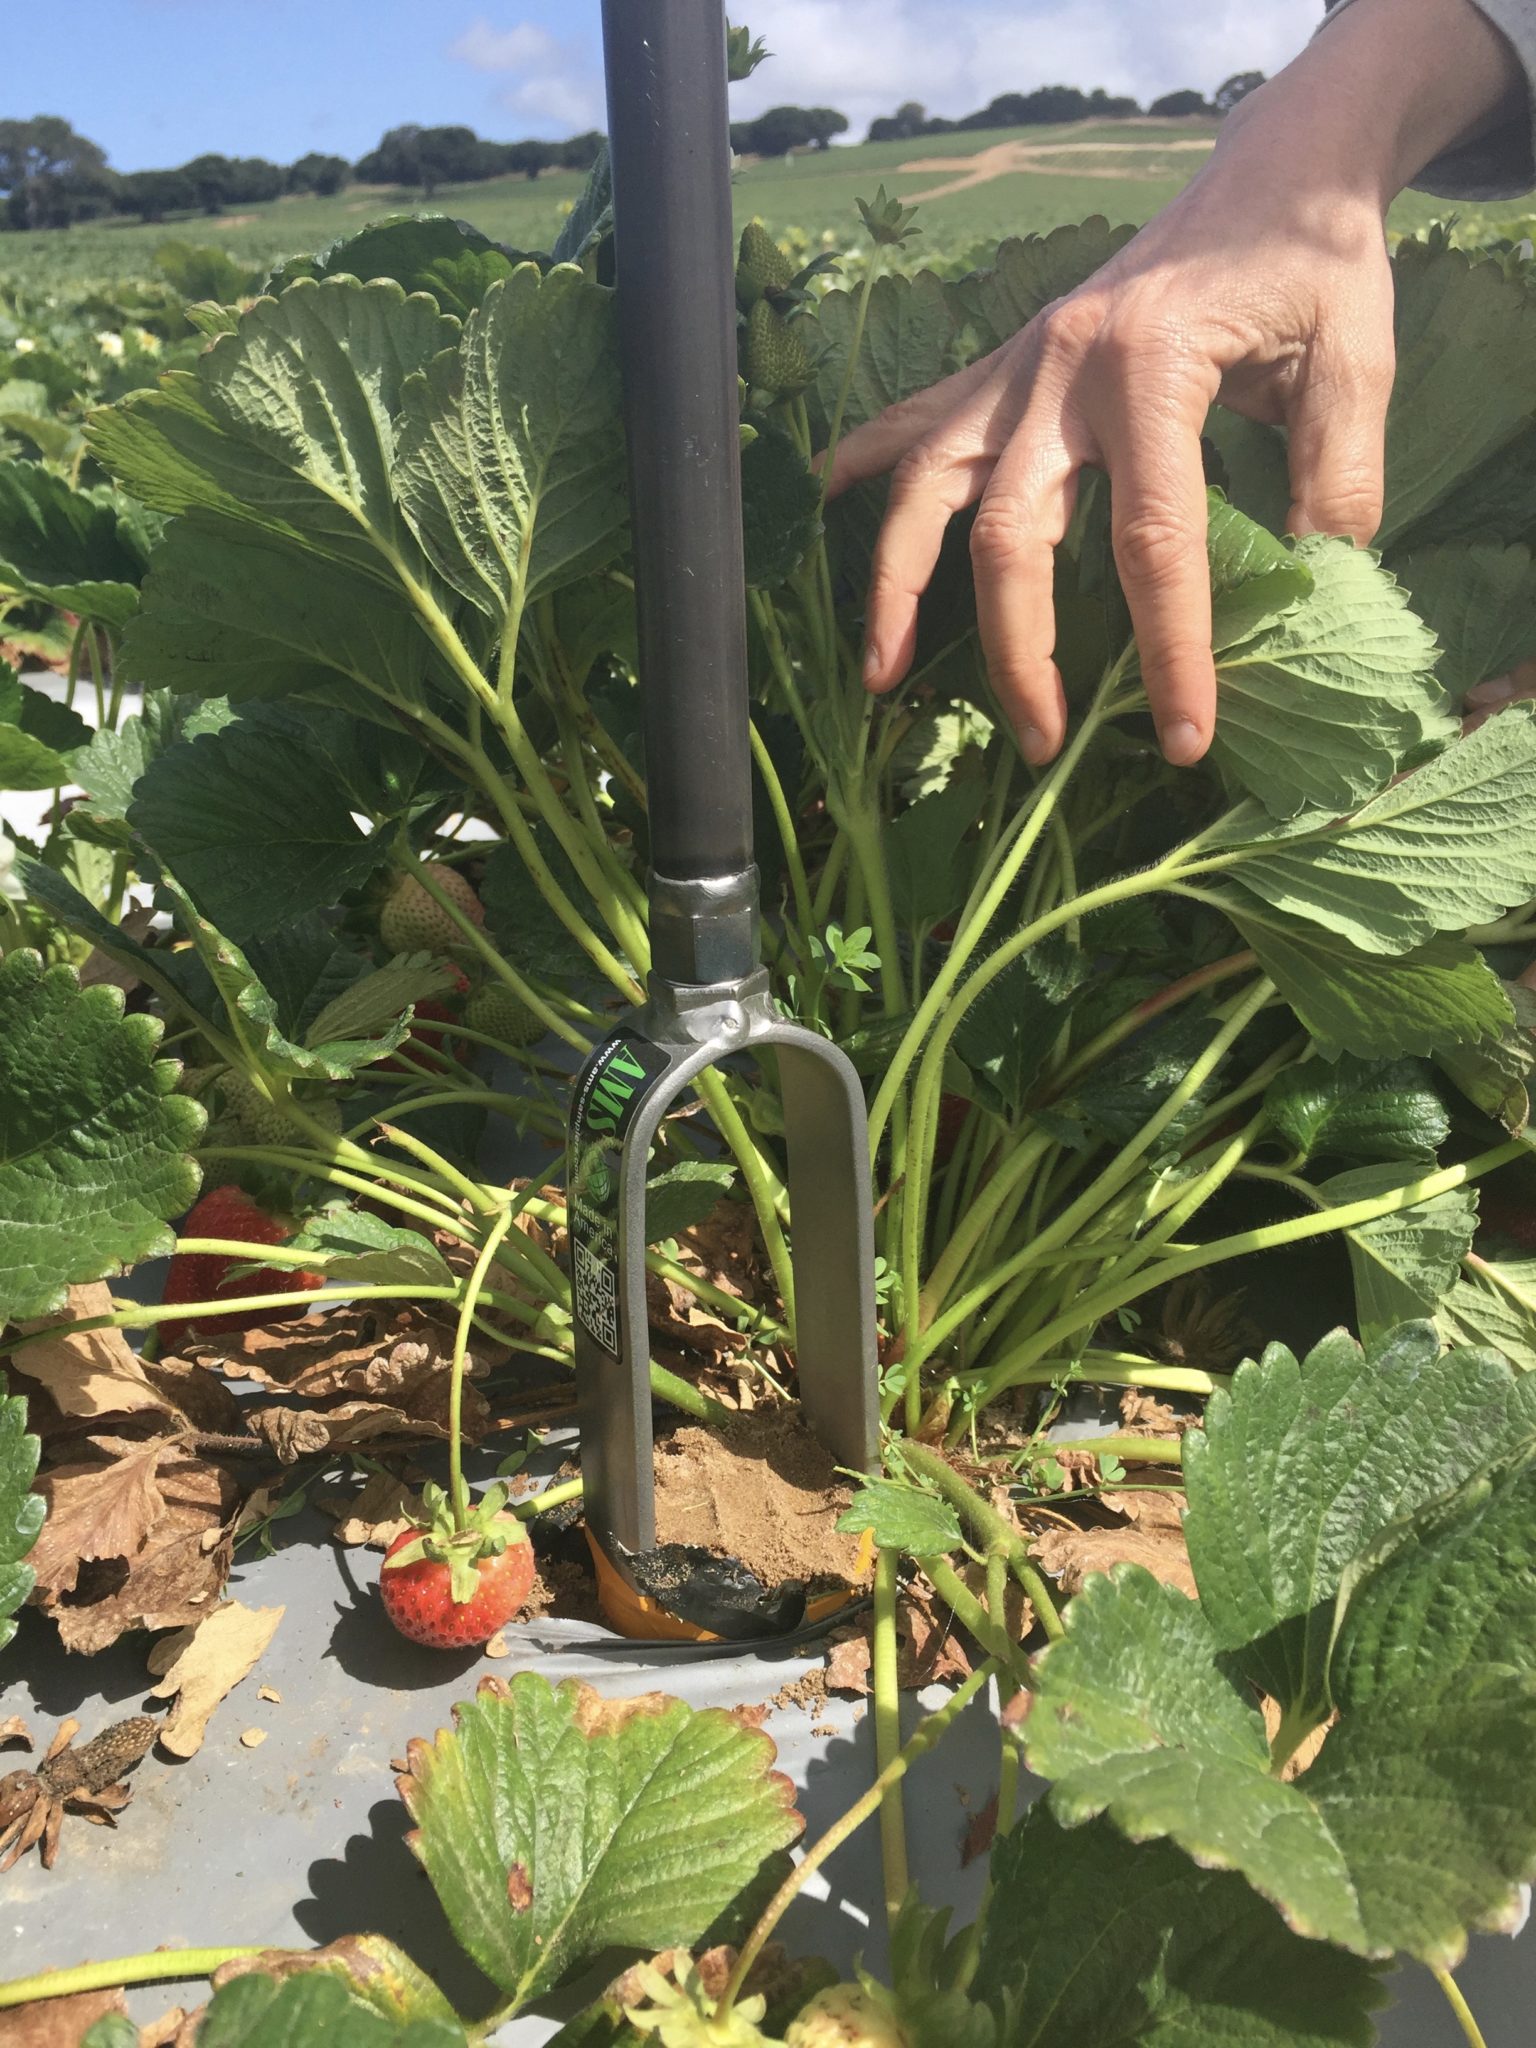 Testing soil in a monocultural strawberry field.